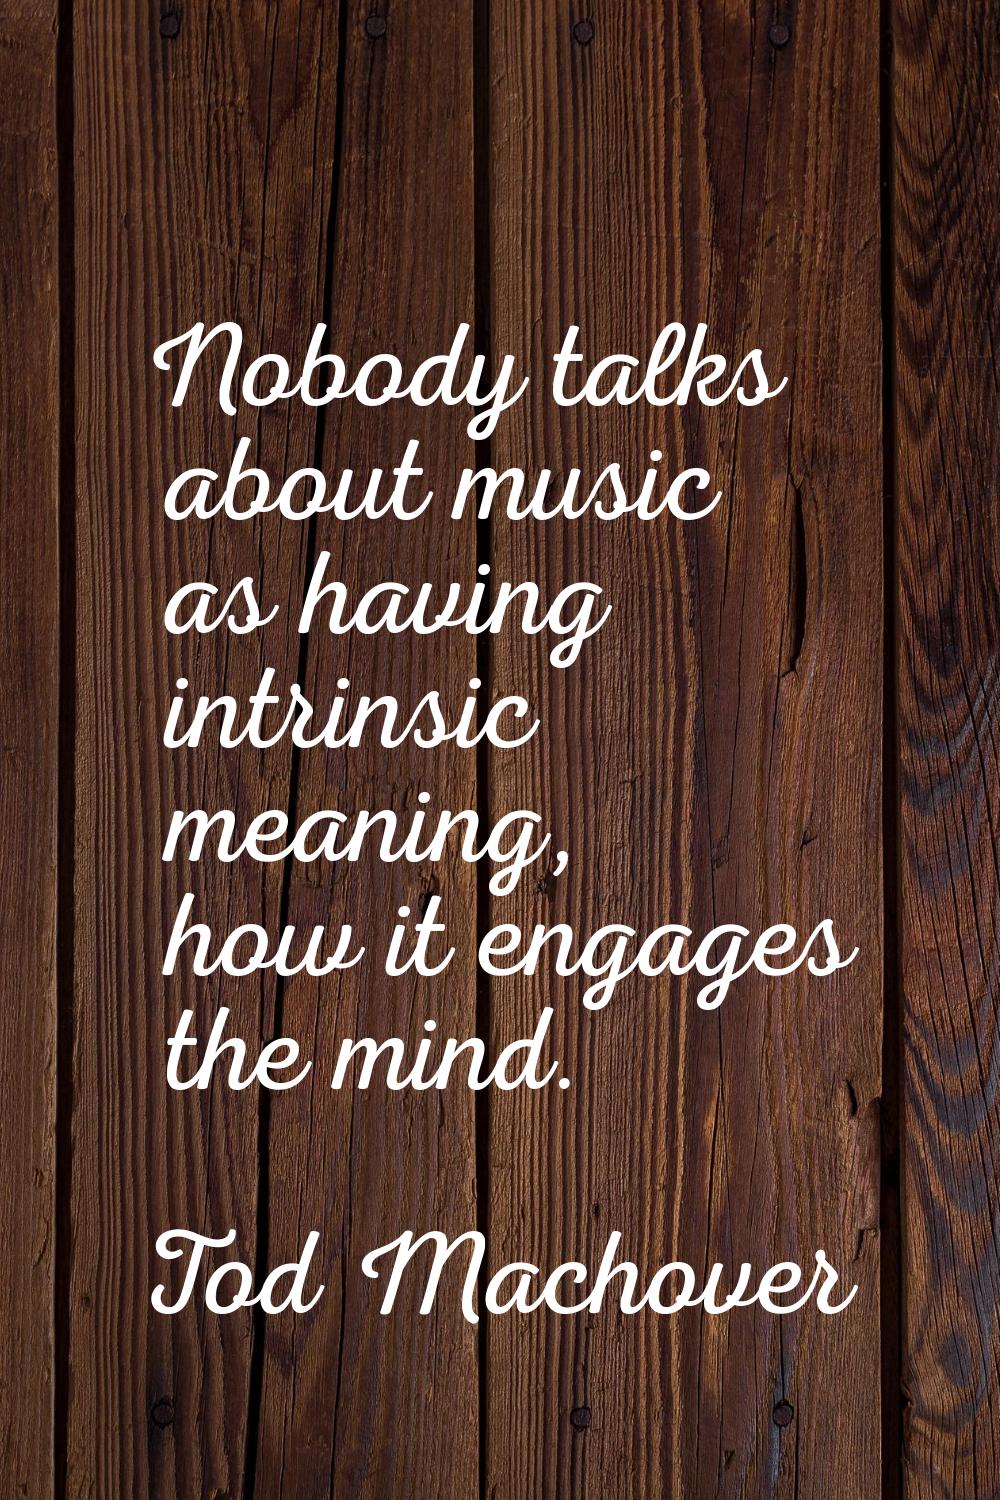 Nobody talks about music as having intrinsic meaning, how it engages the mind.